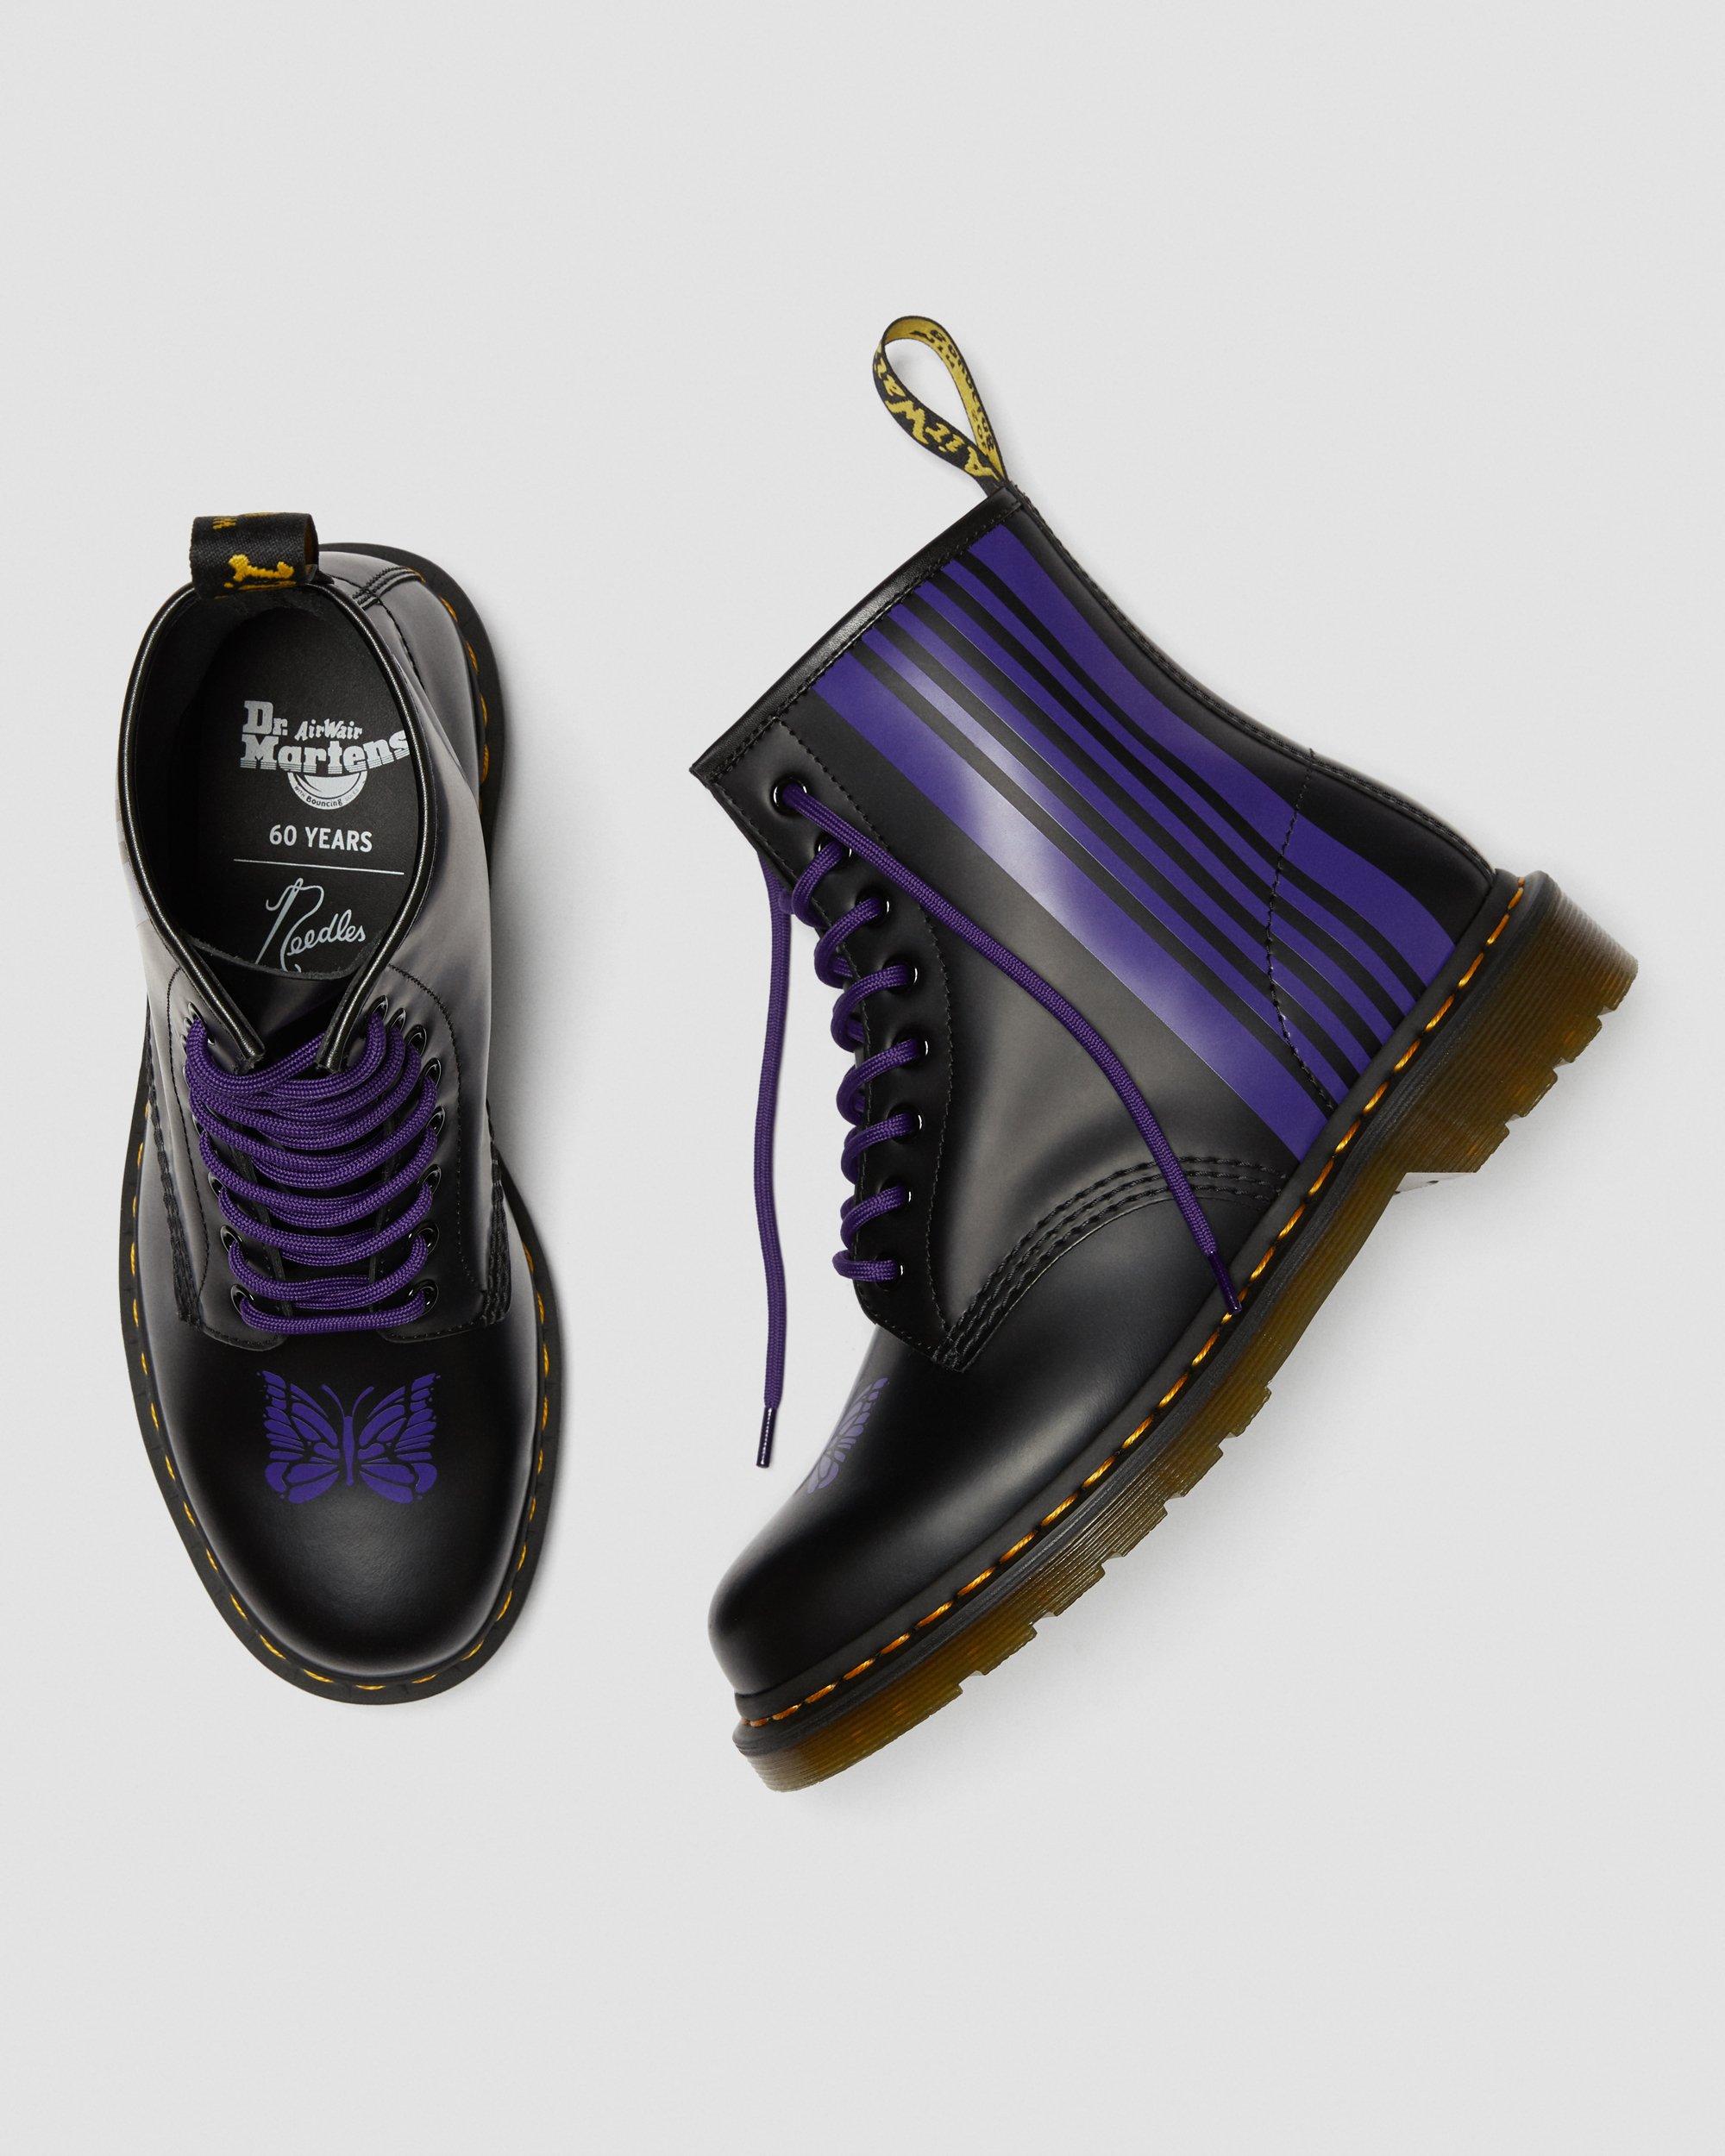 1460 Needles Leather Ankle Boots in Black+Purple